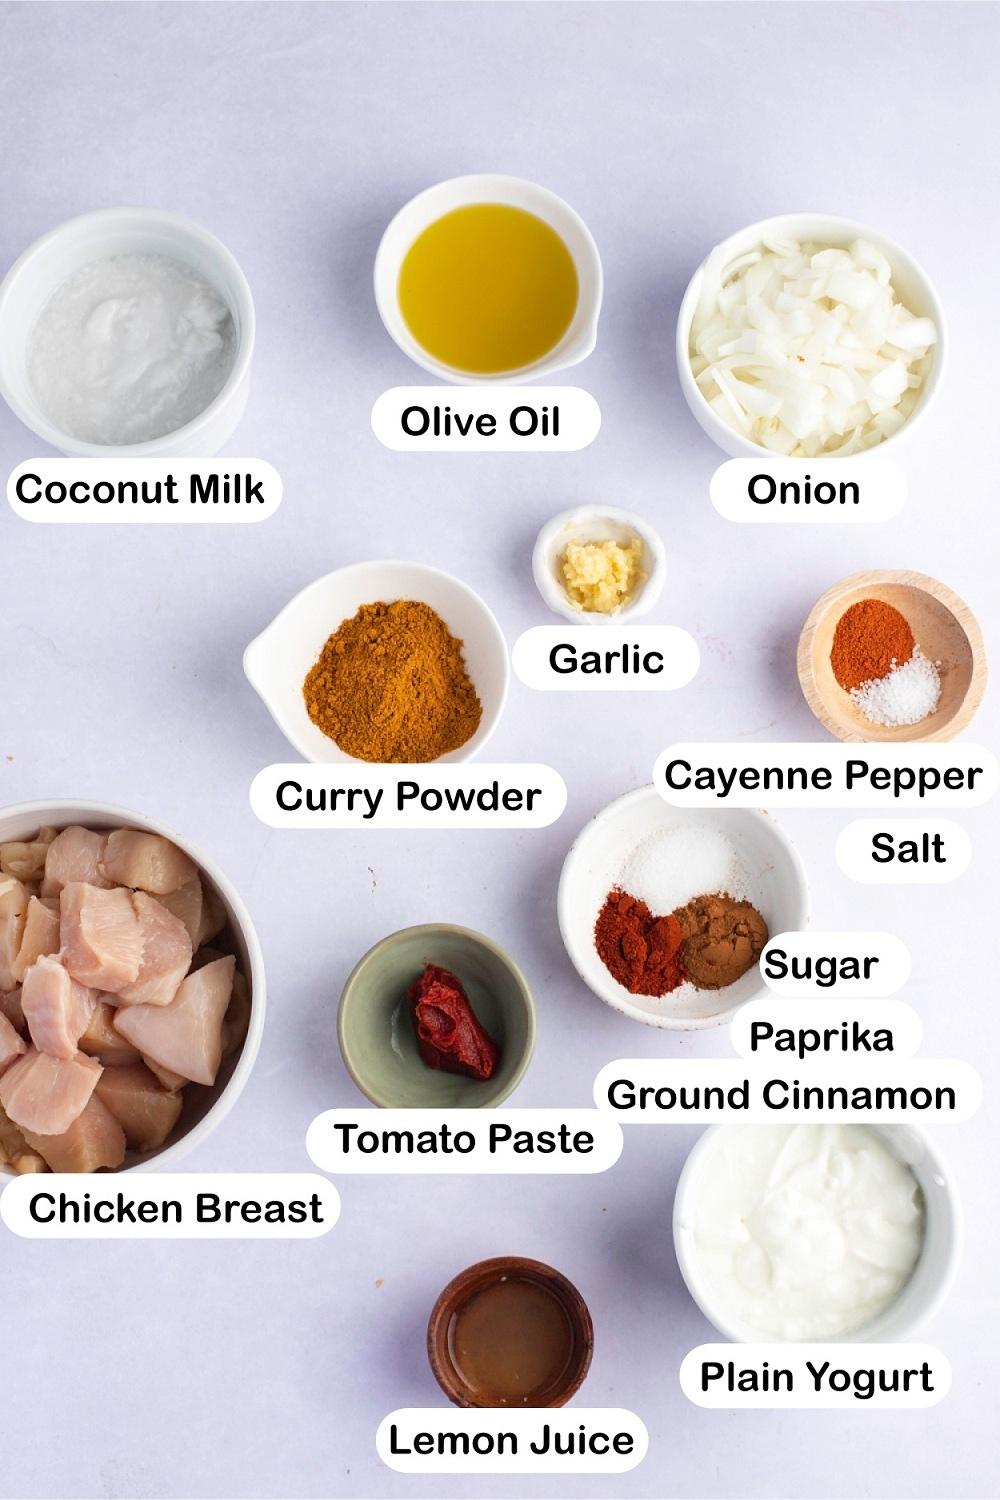 Indian Chicken Curry Recipes - Chicken, Olive Oil, Onion, Garlic, Sugar, Salt, Tomato Paste, Lemon Juice and Cayenne Pepper